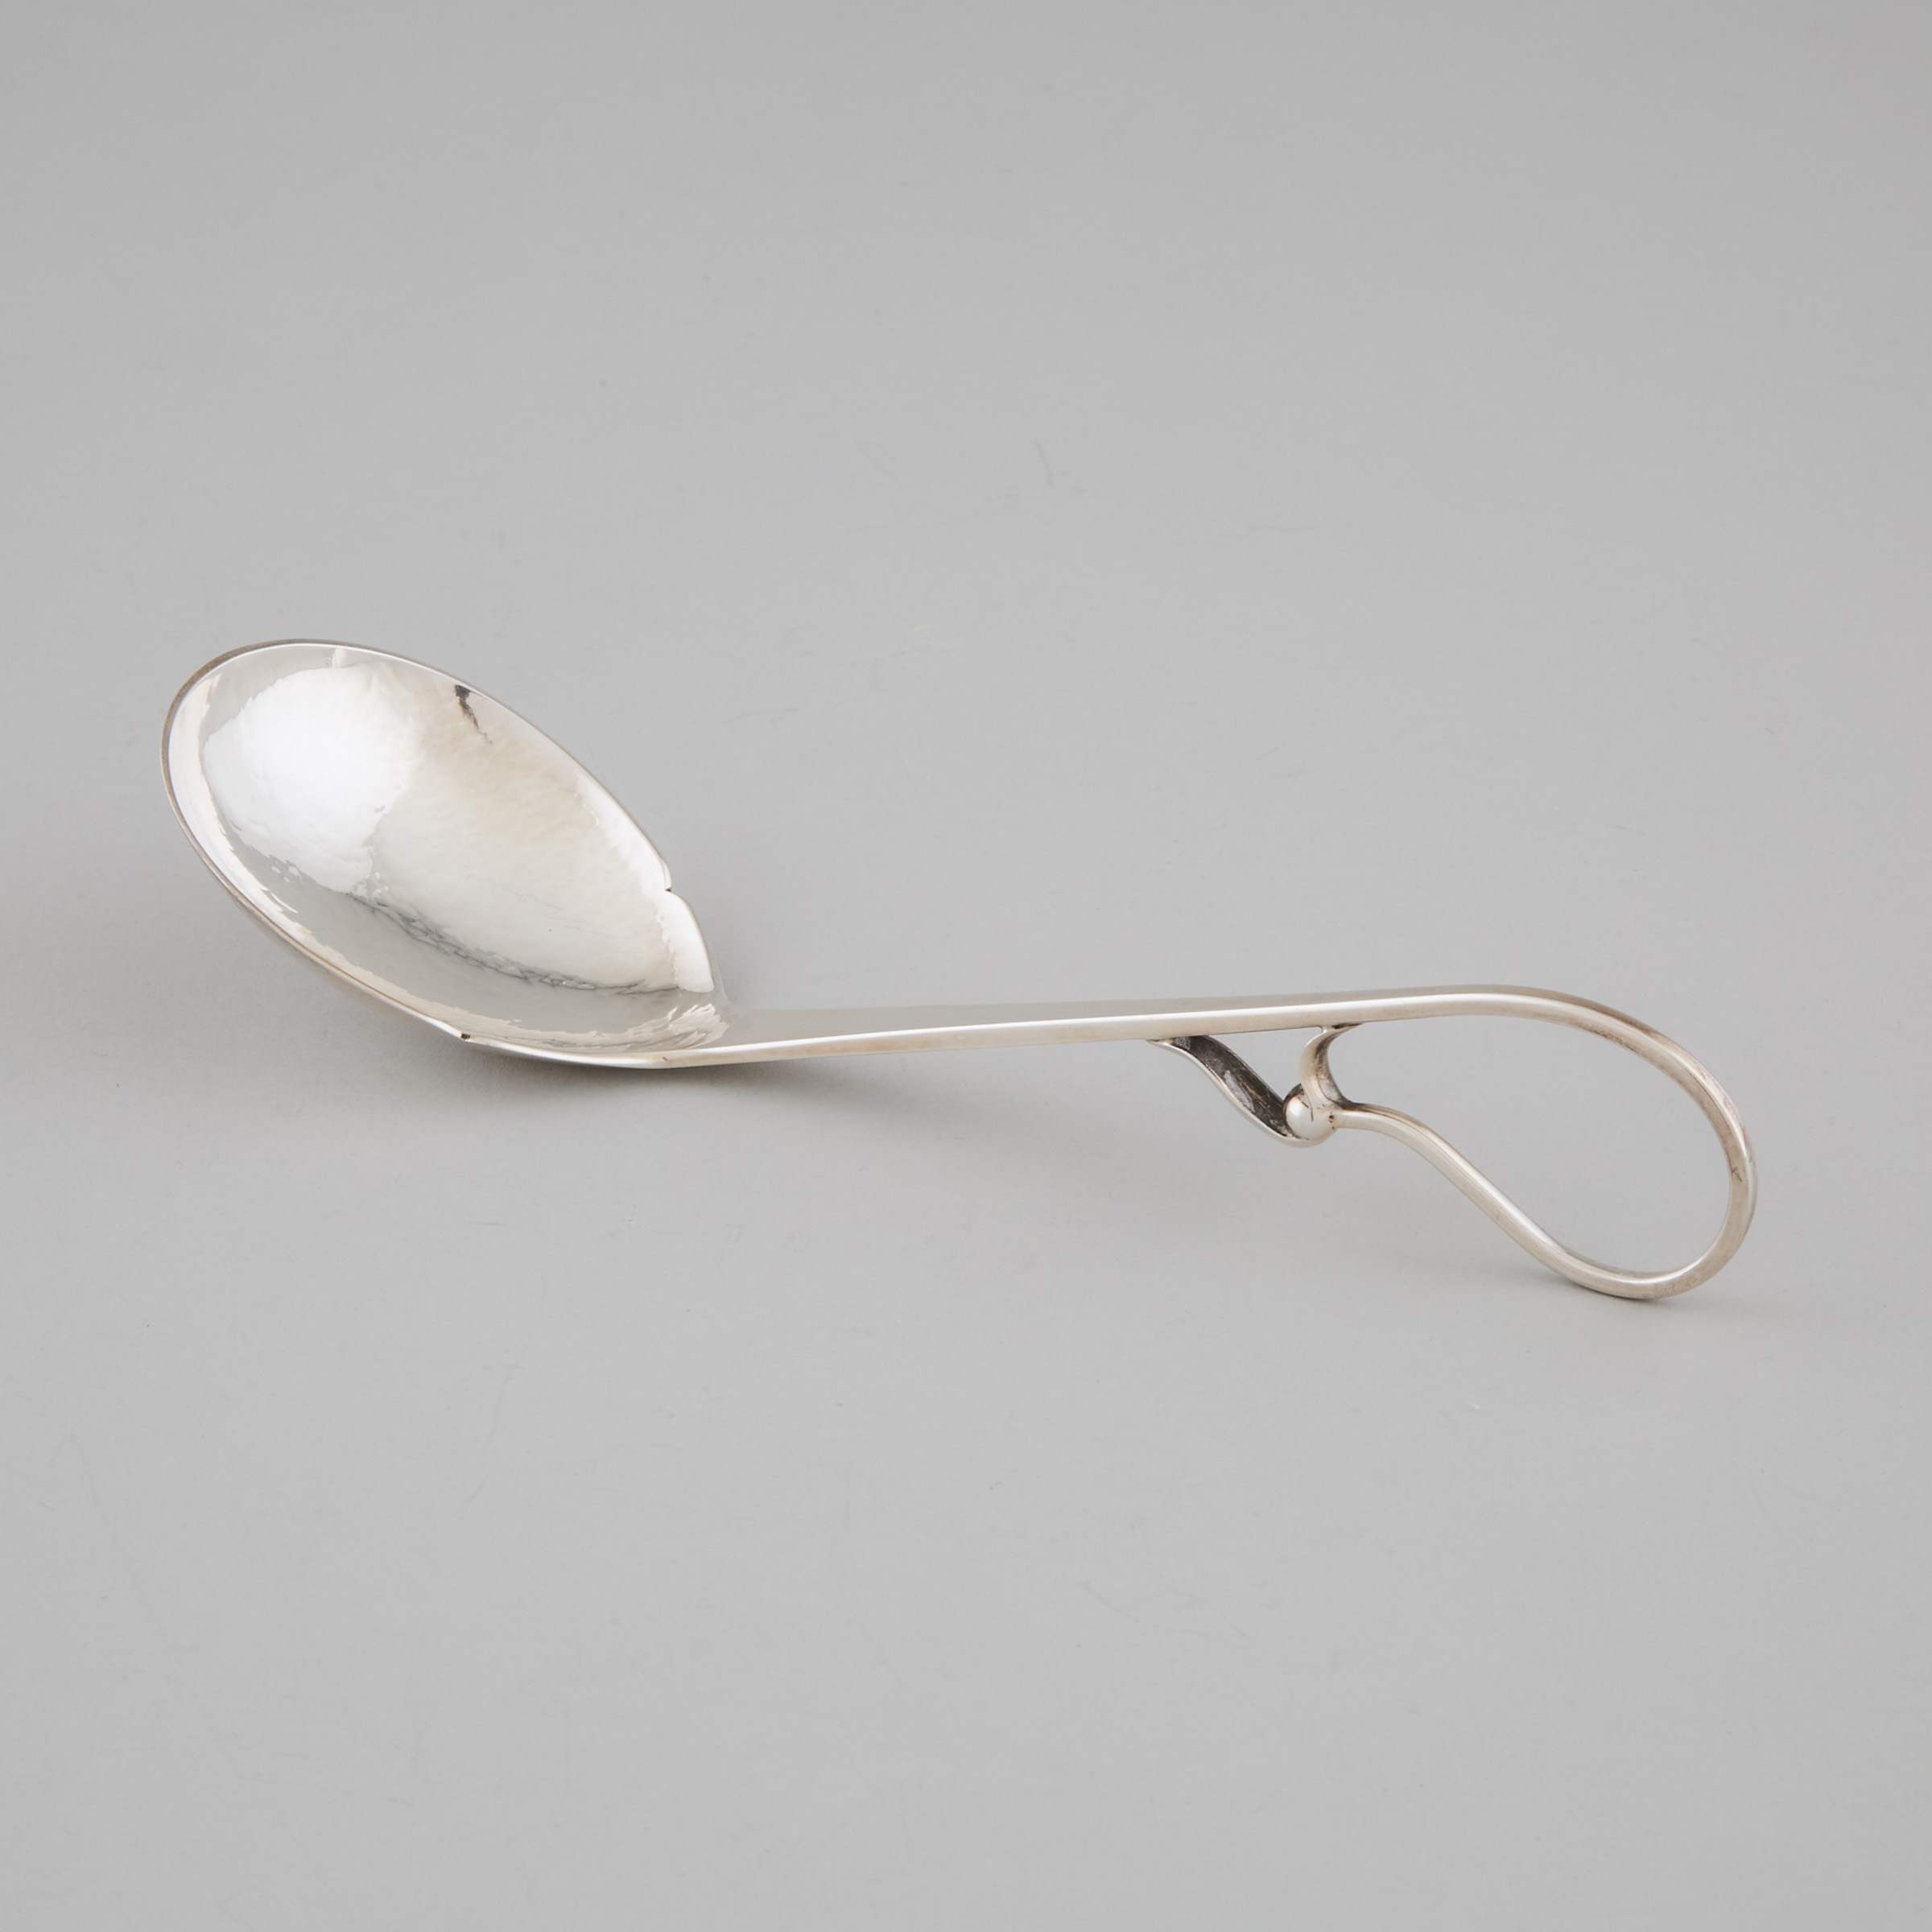 Canadian Silver Berry Spoon, Carl Poul Petersen, Montreal, Que., mid-20th century